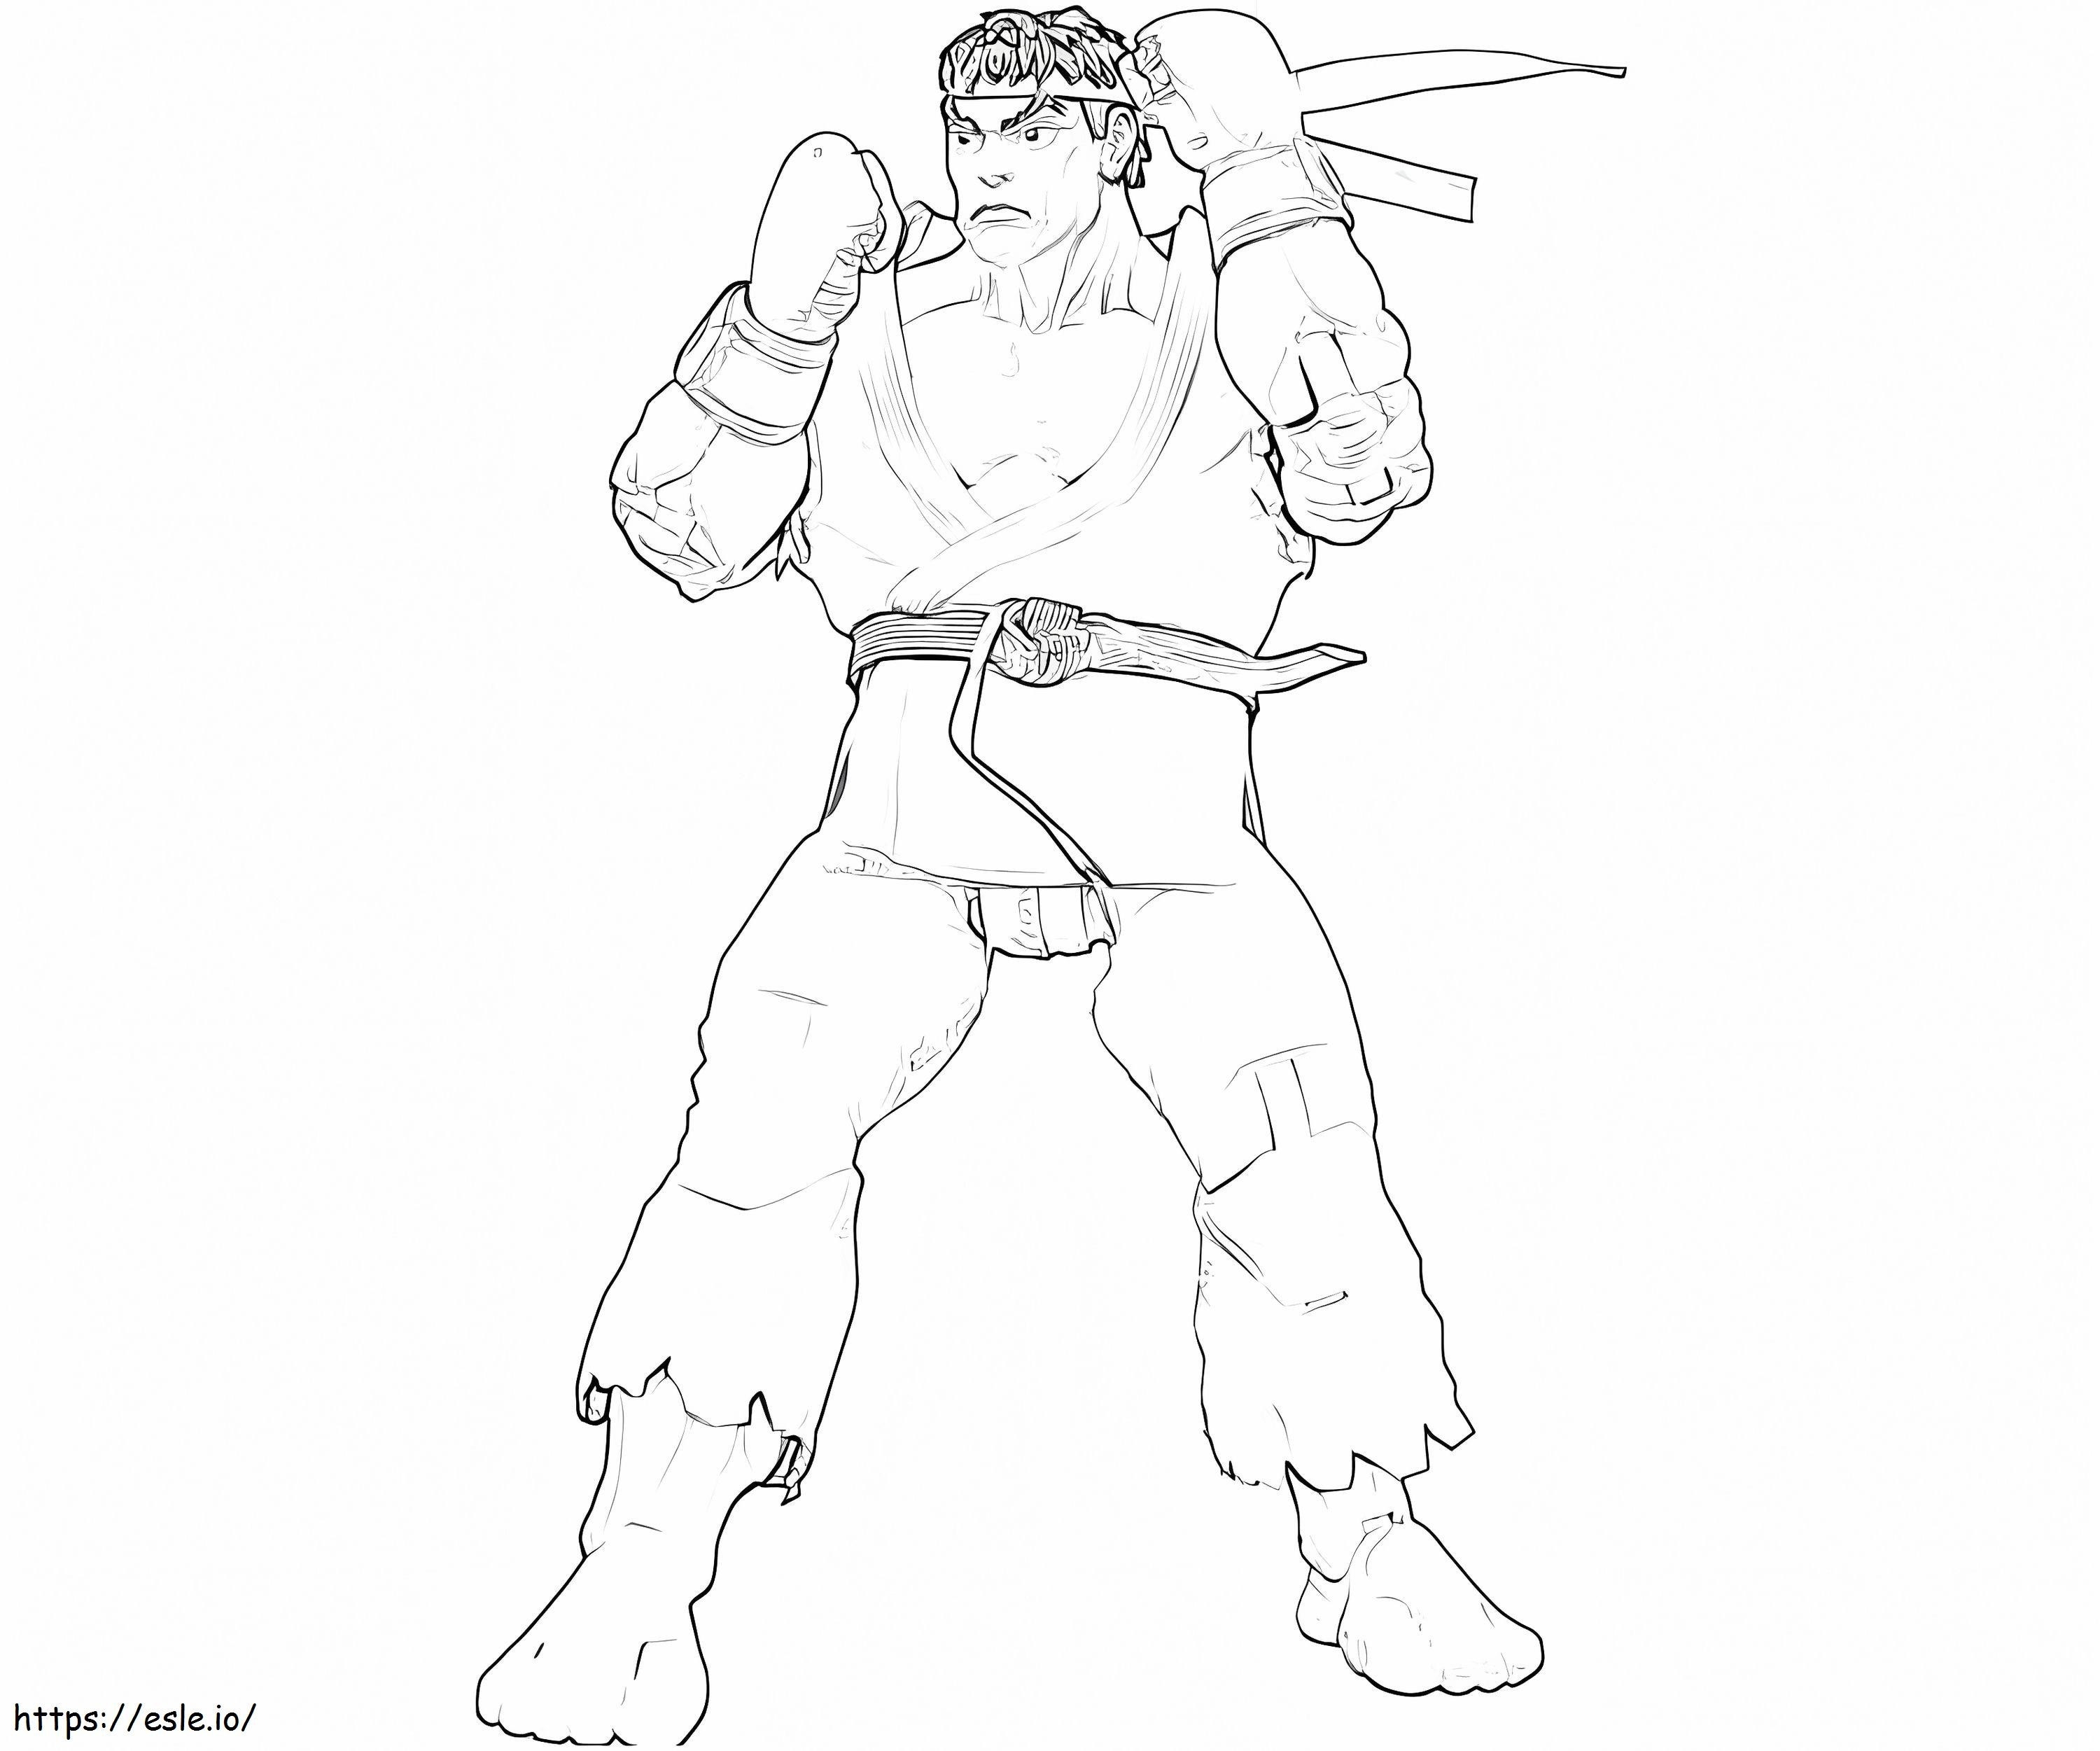 Draw Ryu coloring page